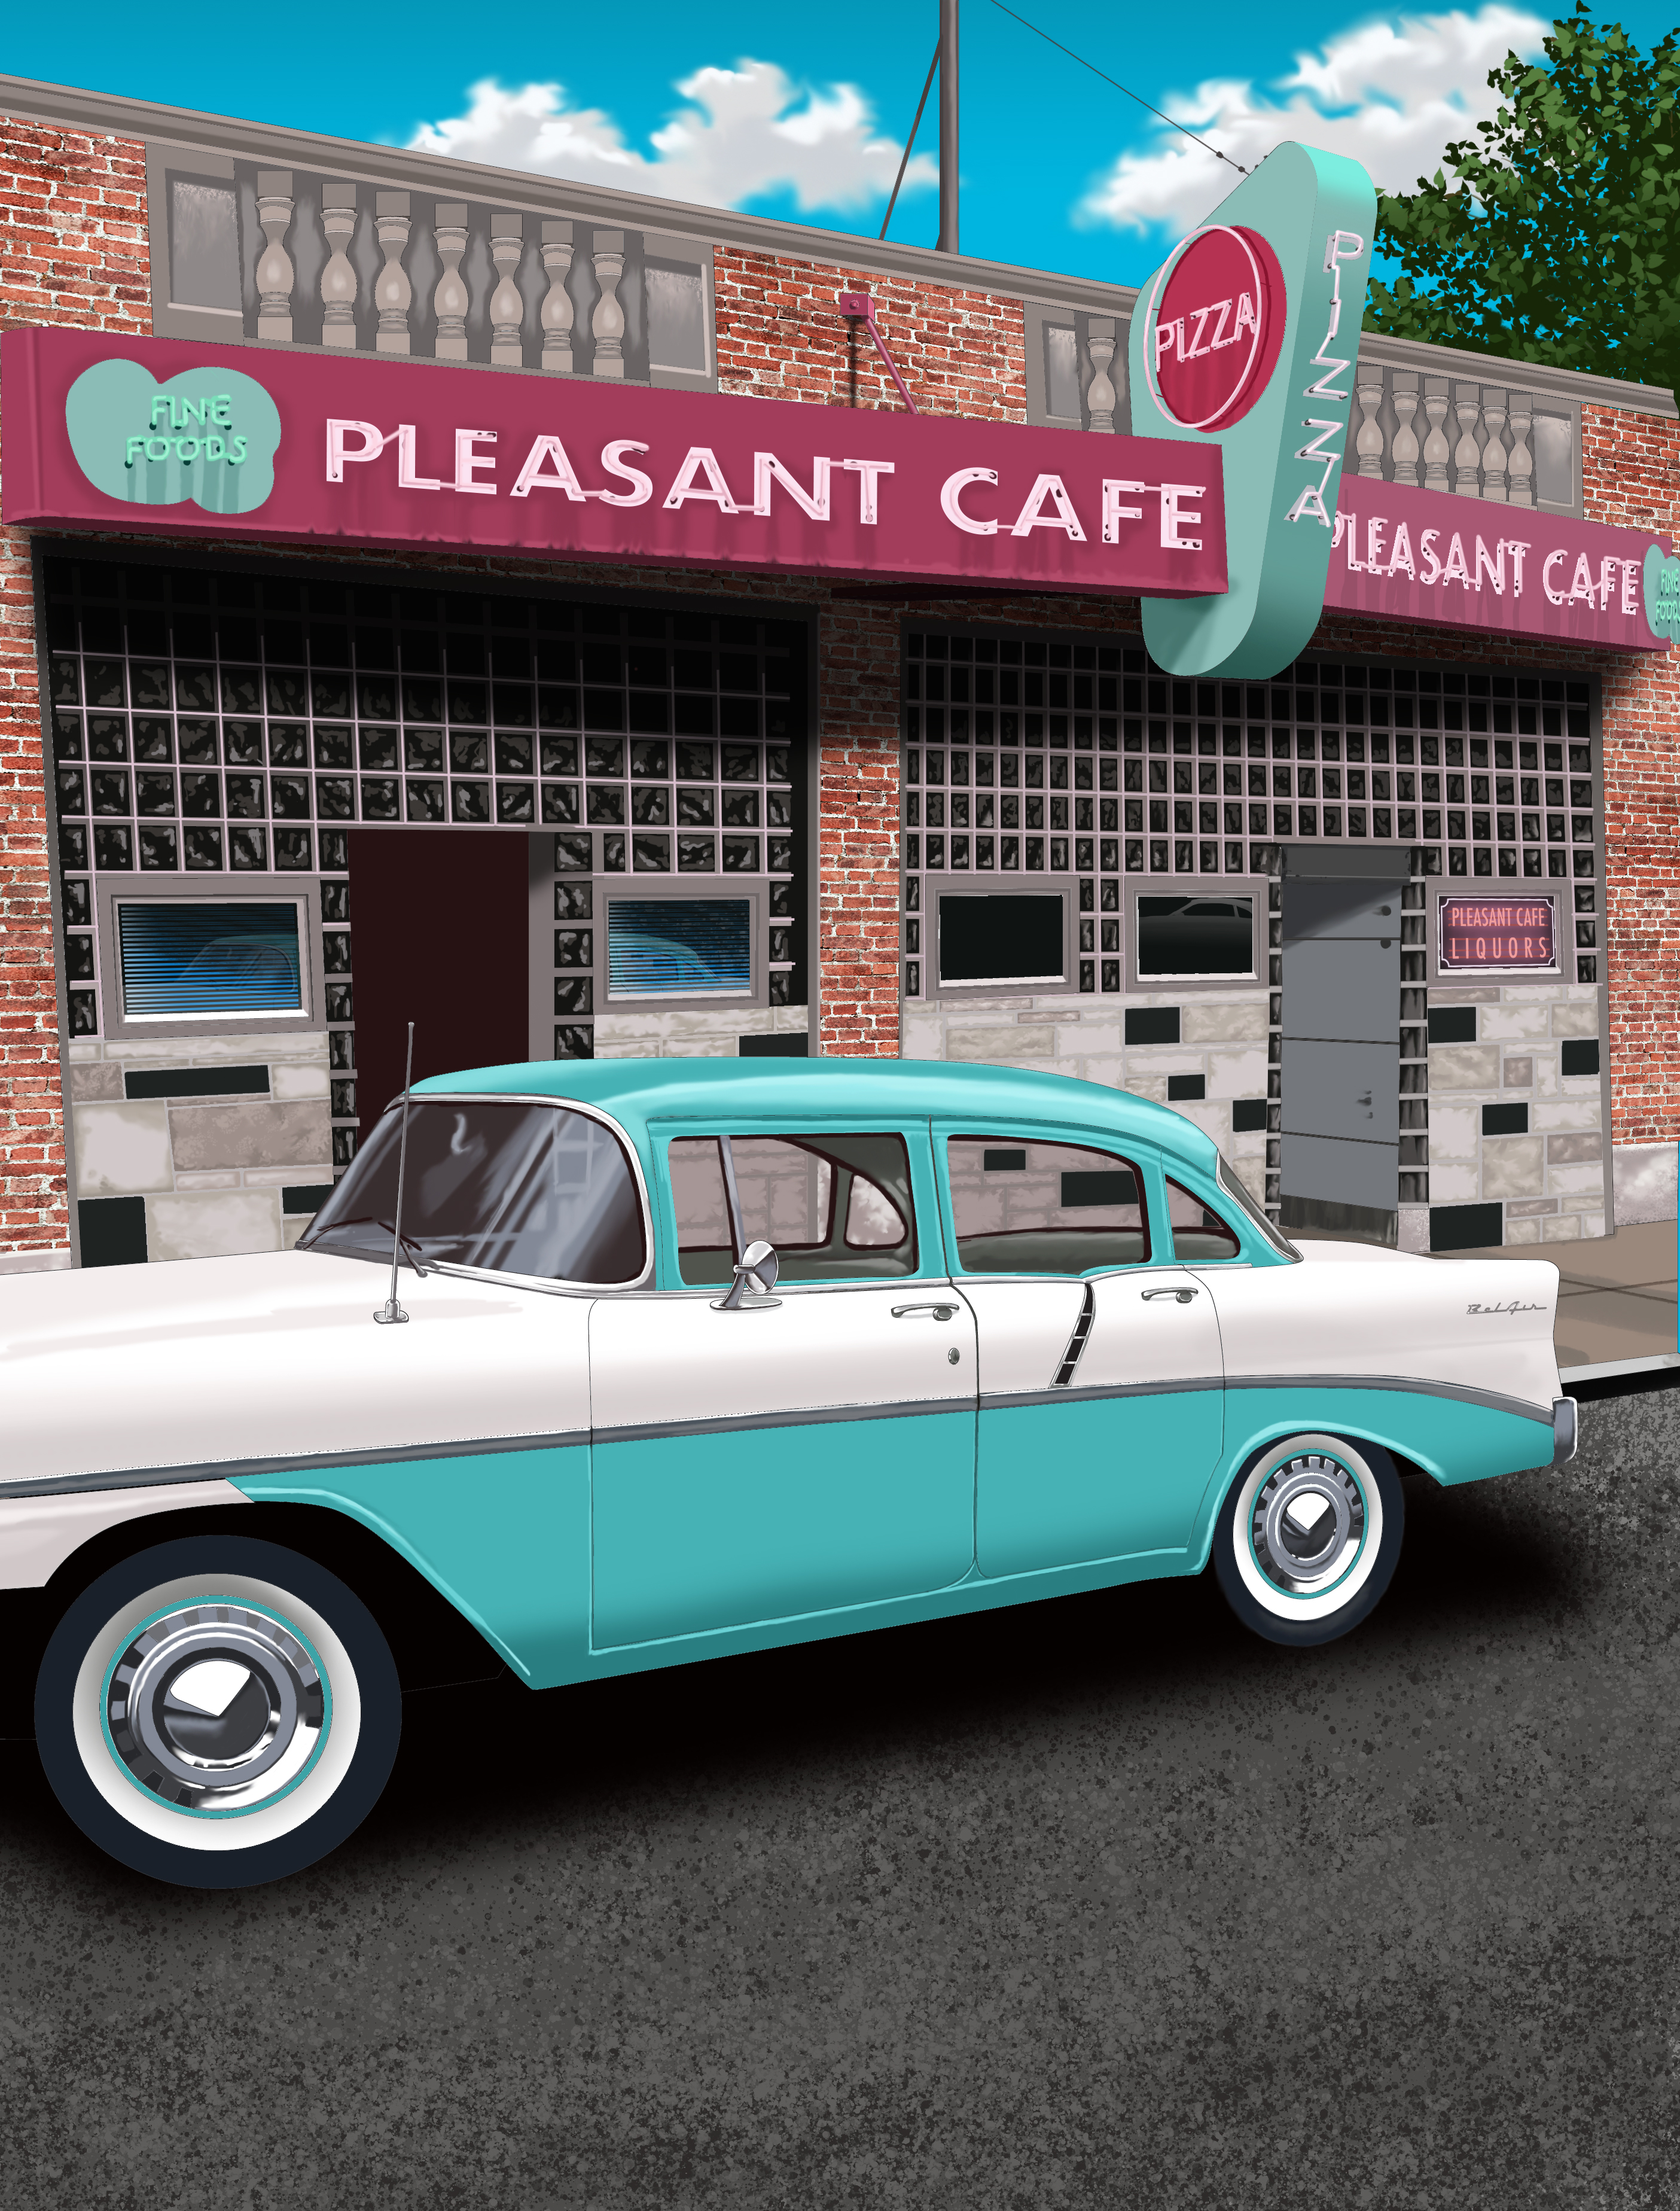 56 Chevy Bel Air. Painted in Photoshop.